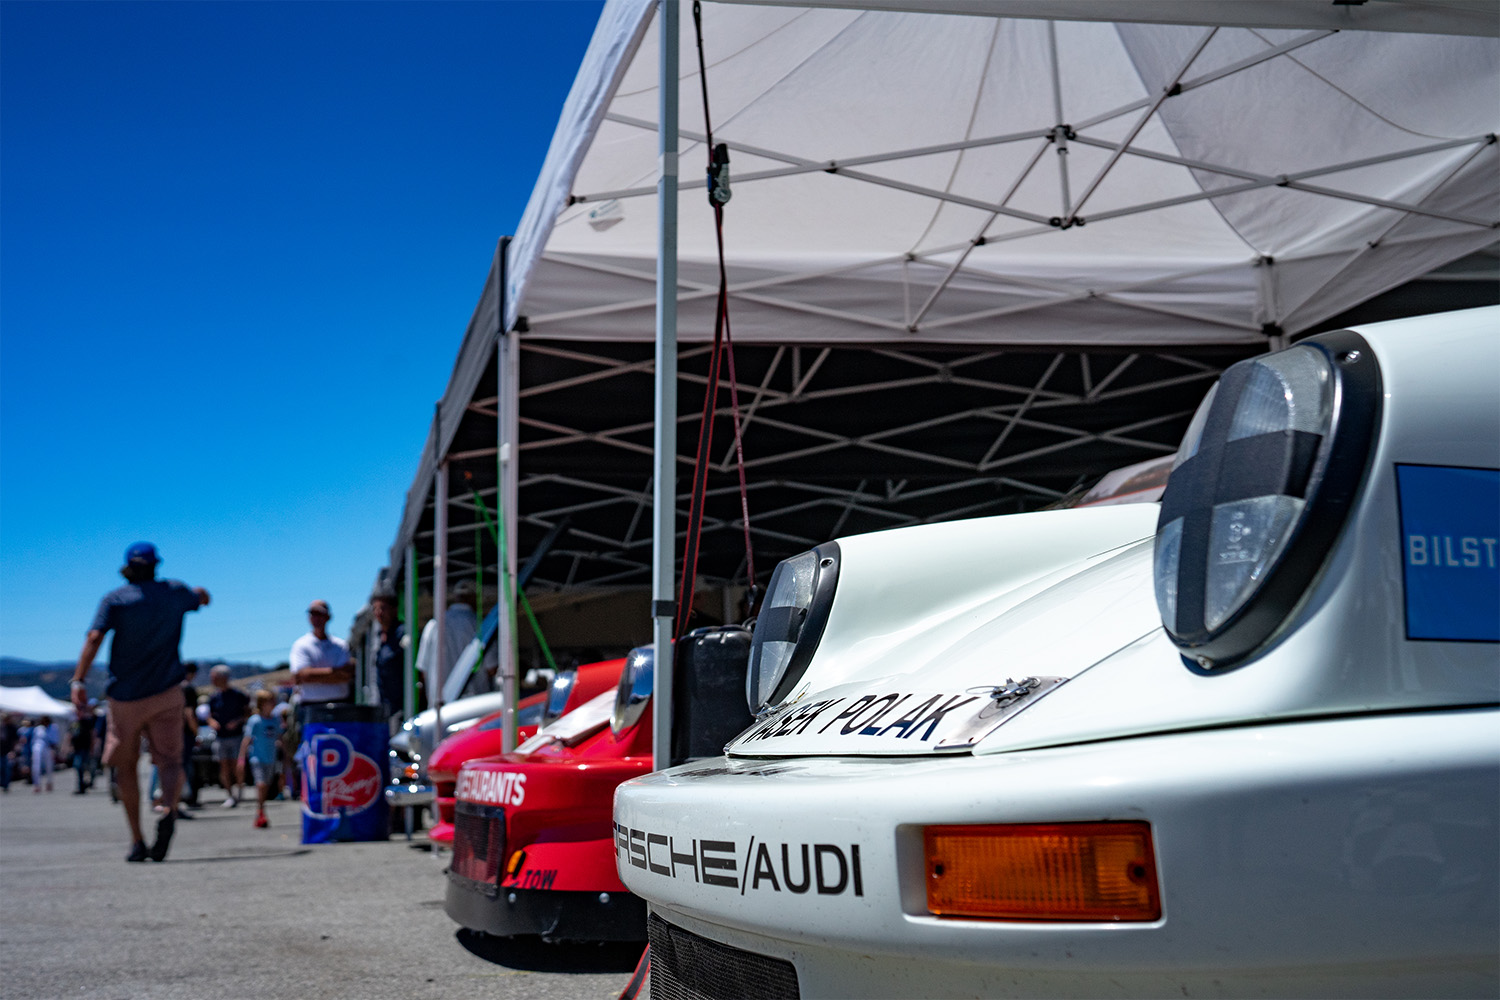 The vibe at Laguna Seca is more utilitarian than the councourses at the shows.